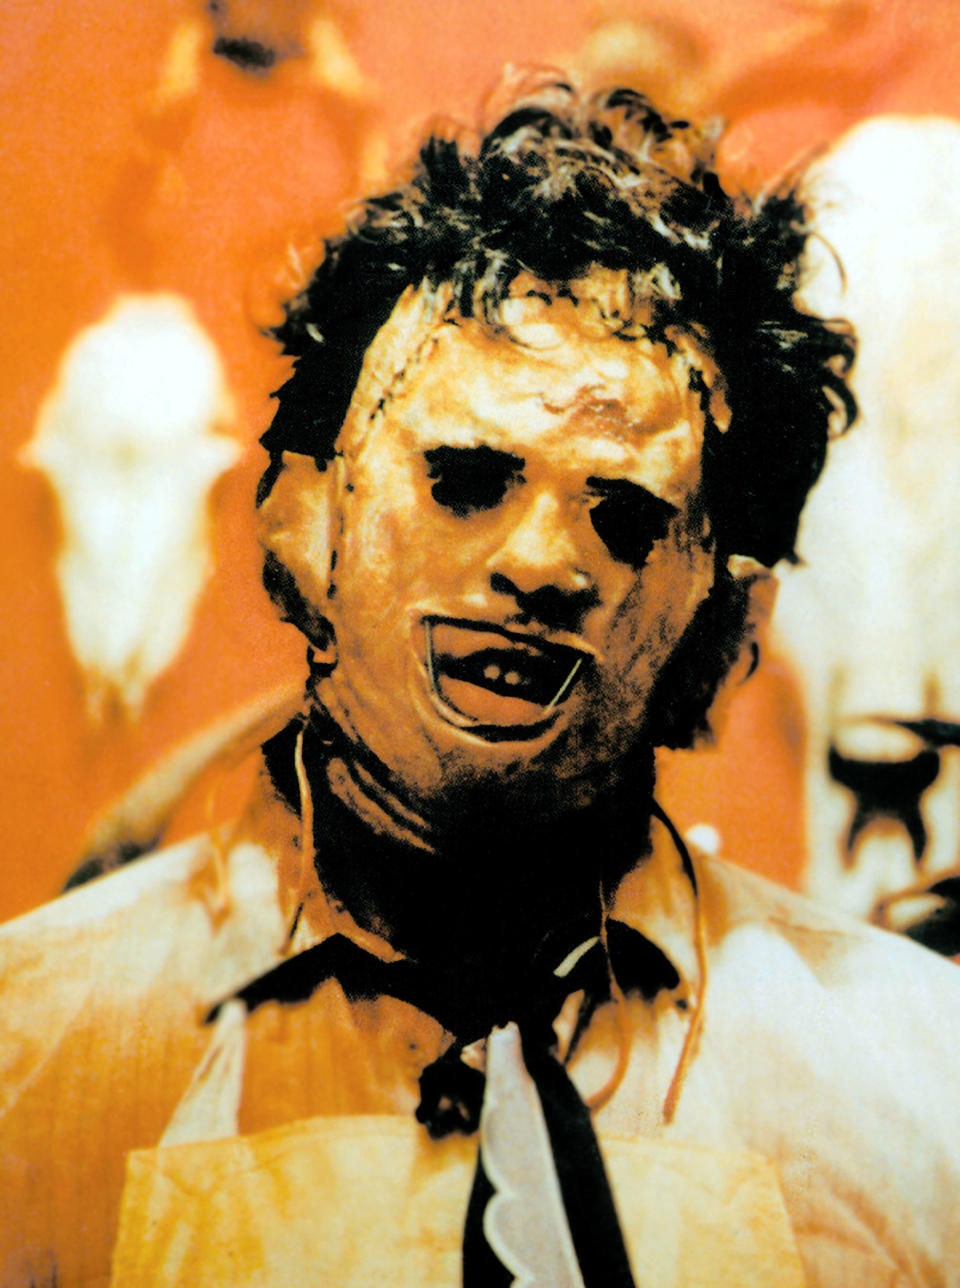 Leatherface snarls through his terrifying mask